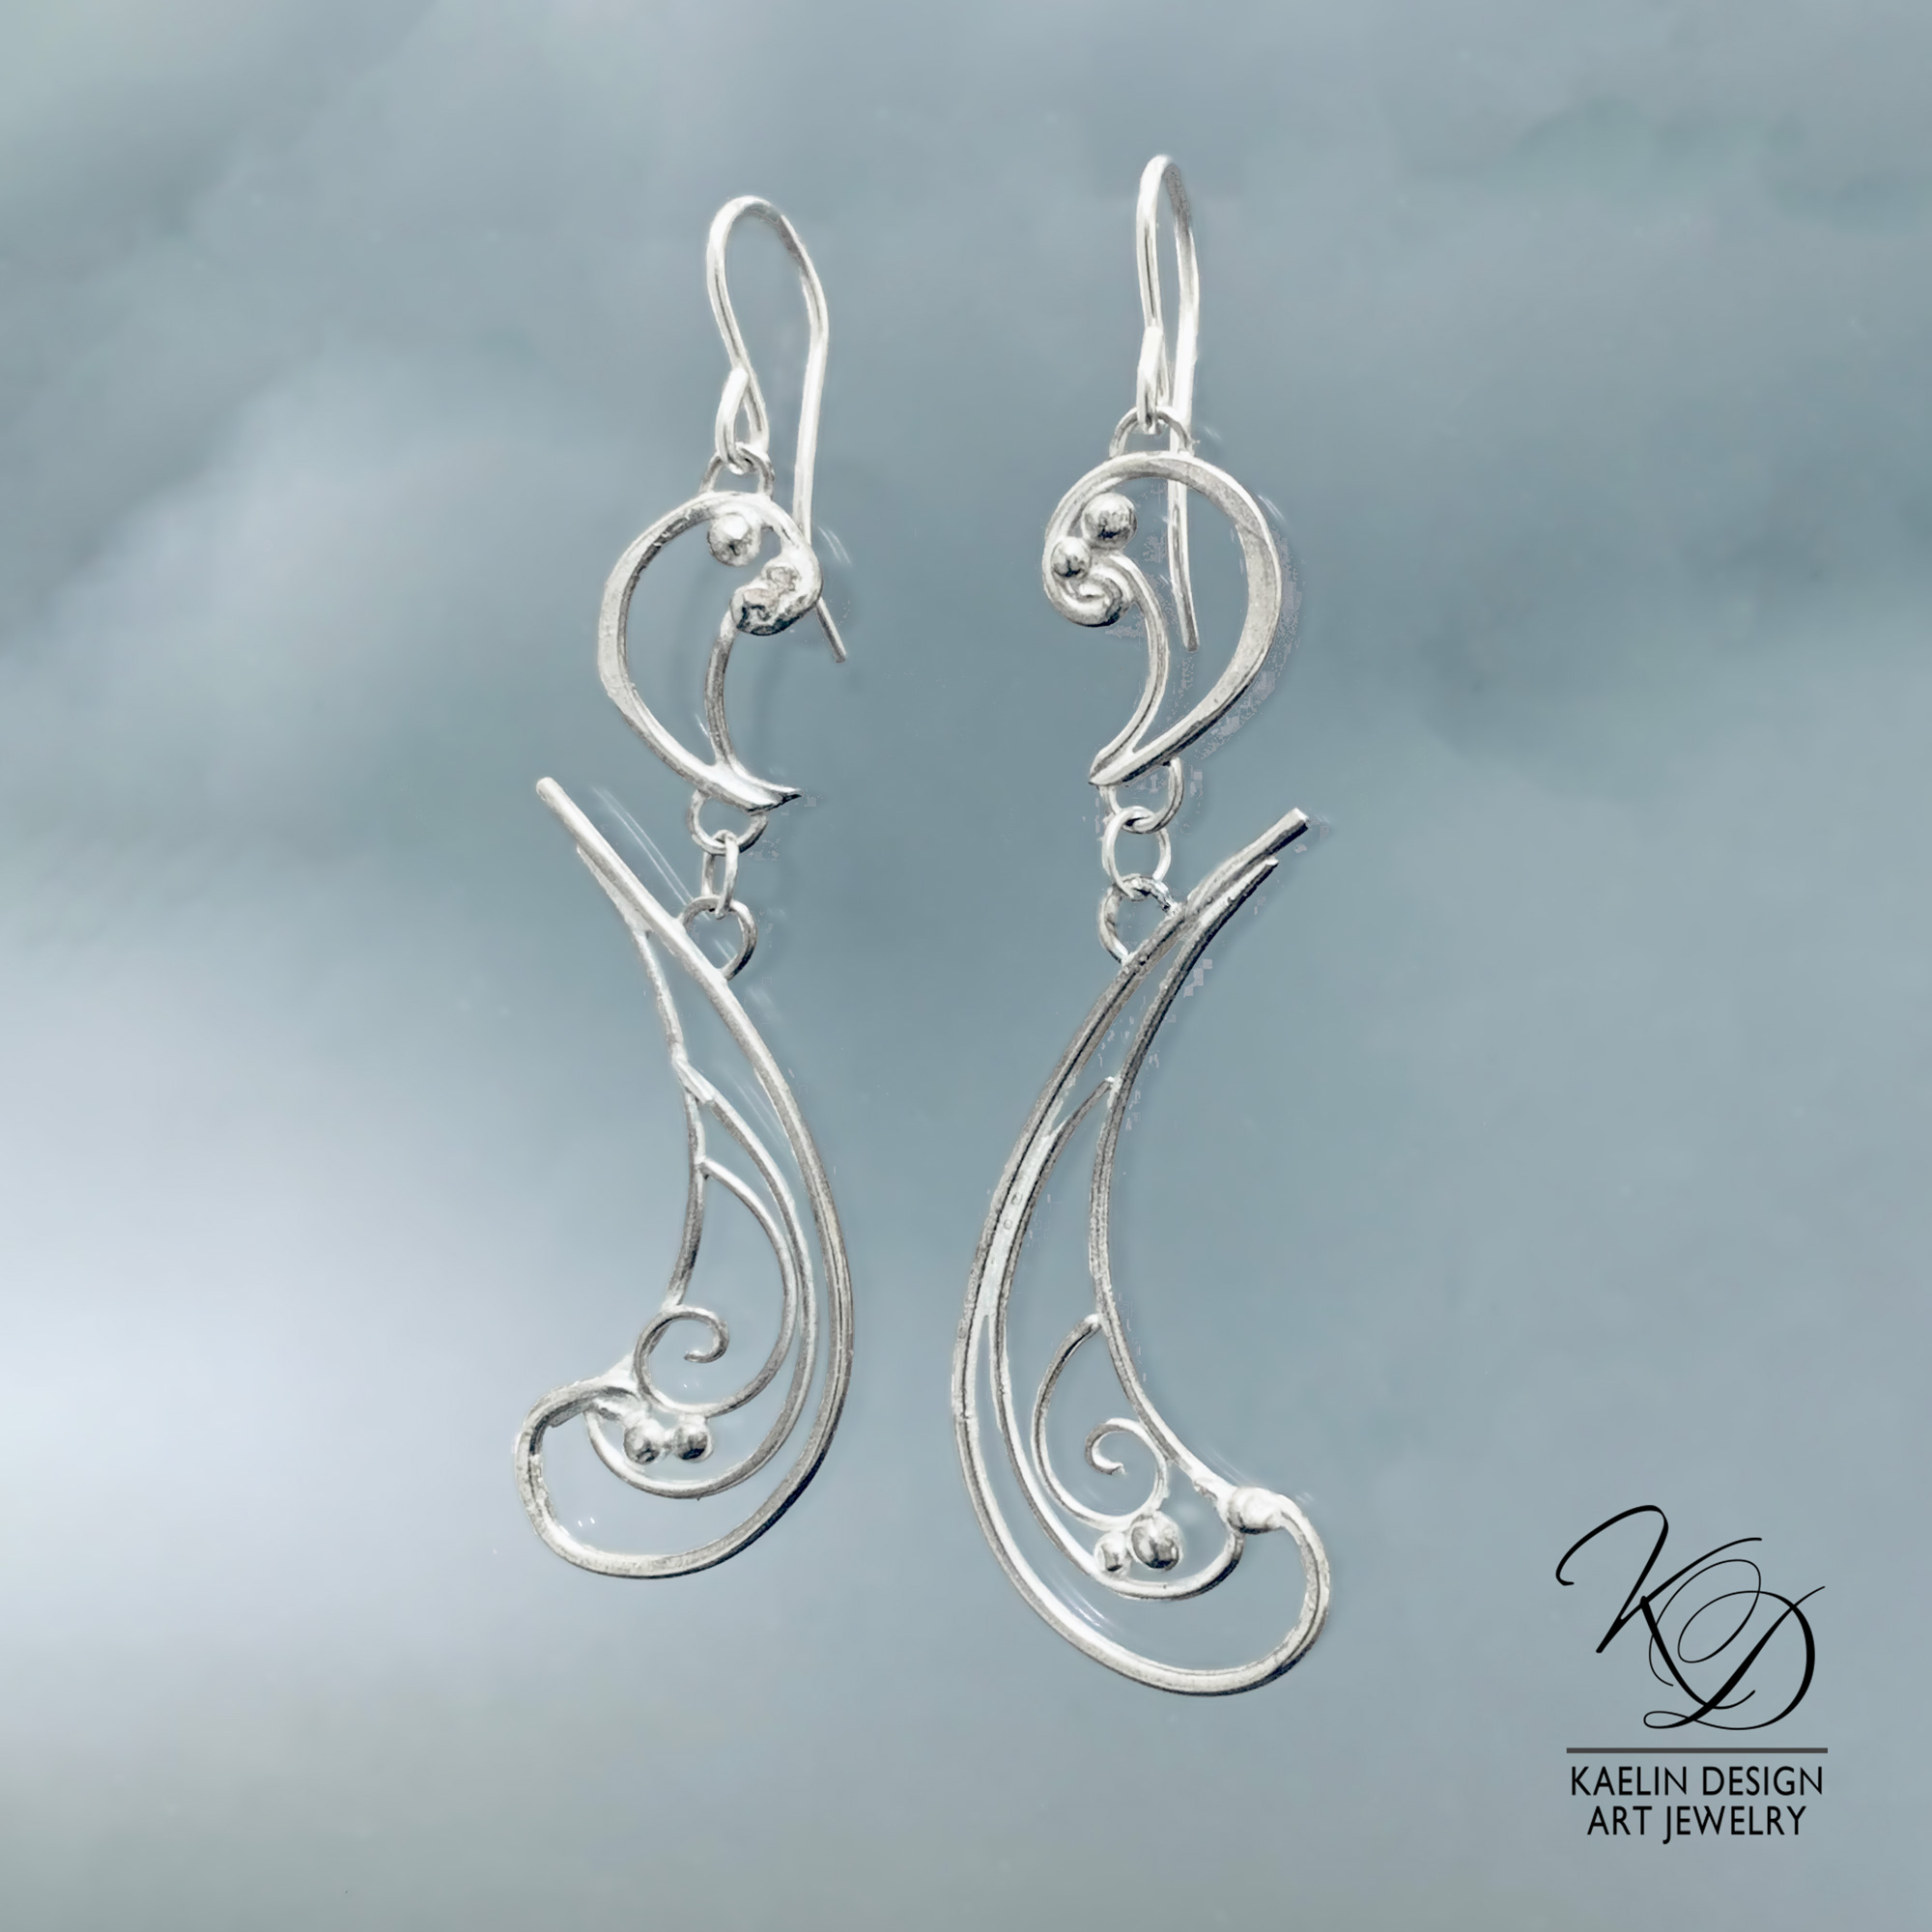 Surf Hand Forged Sterling Silver Ocean Inspired Earrings by Kaelin Design